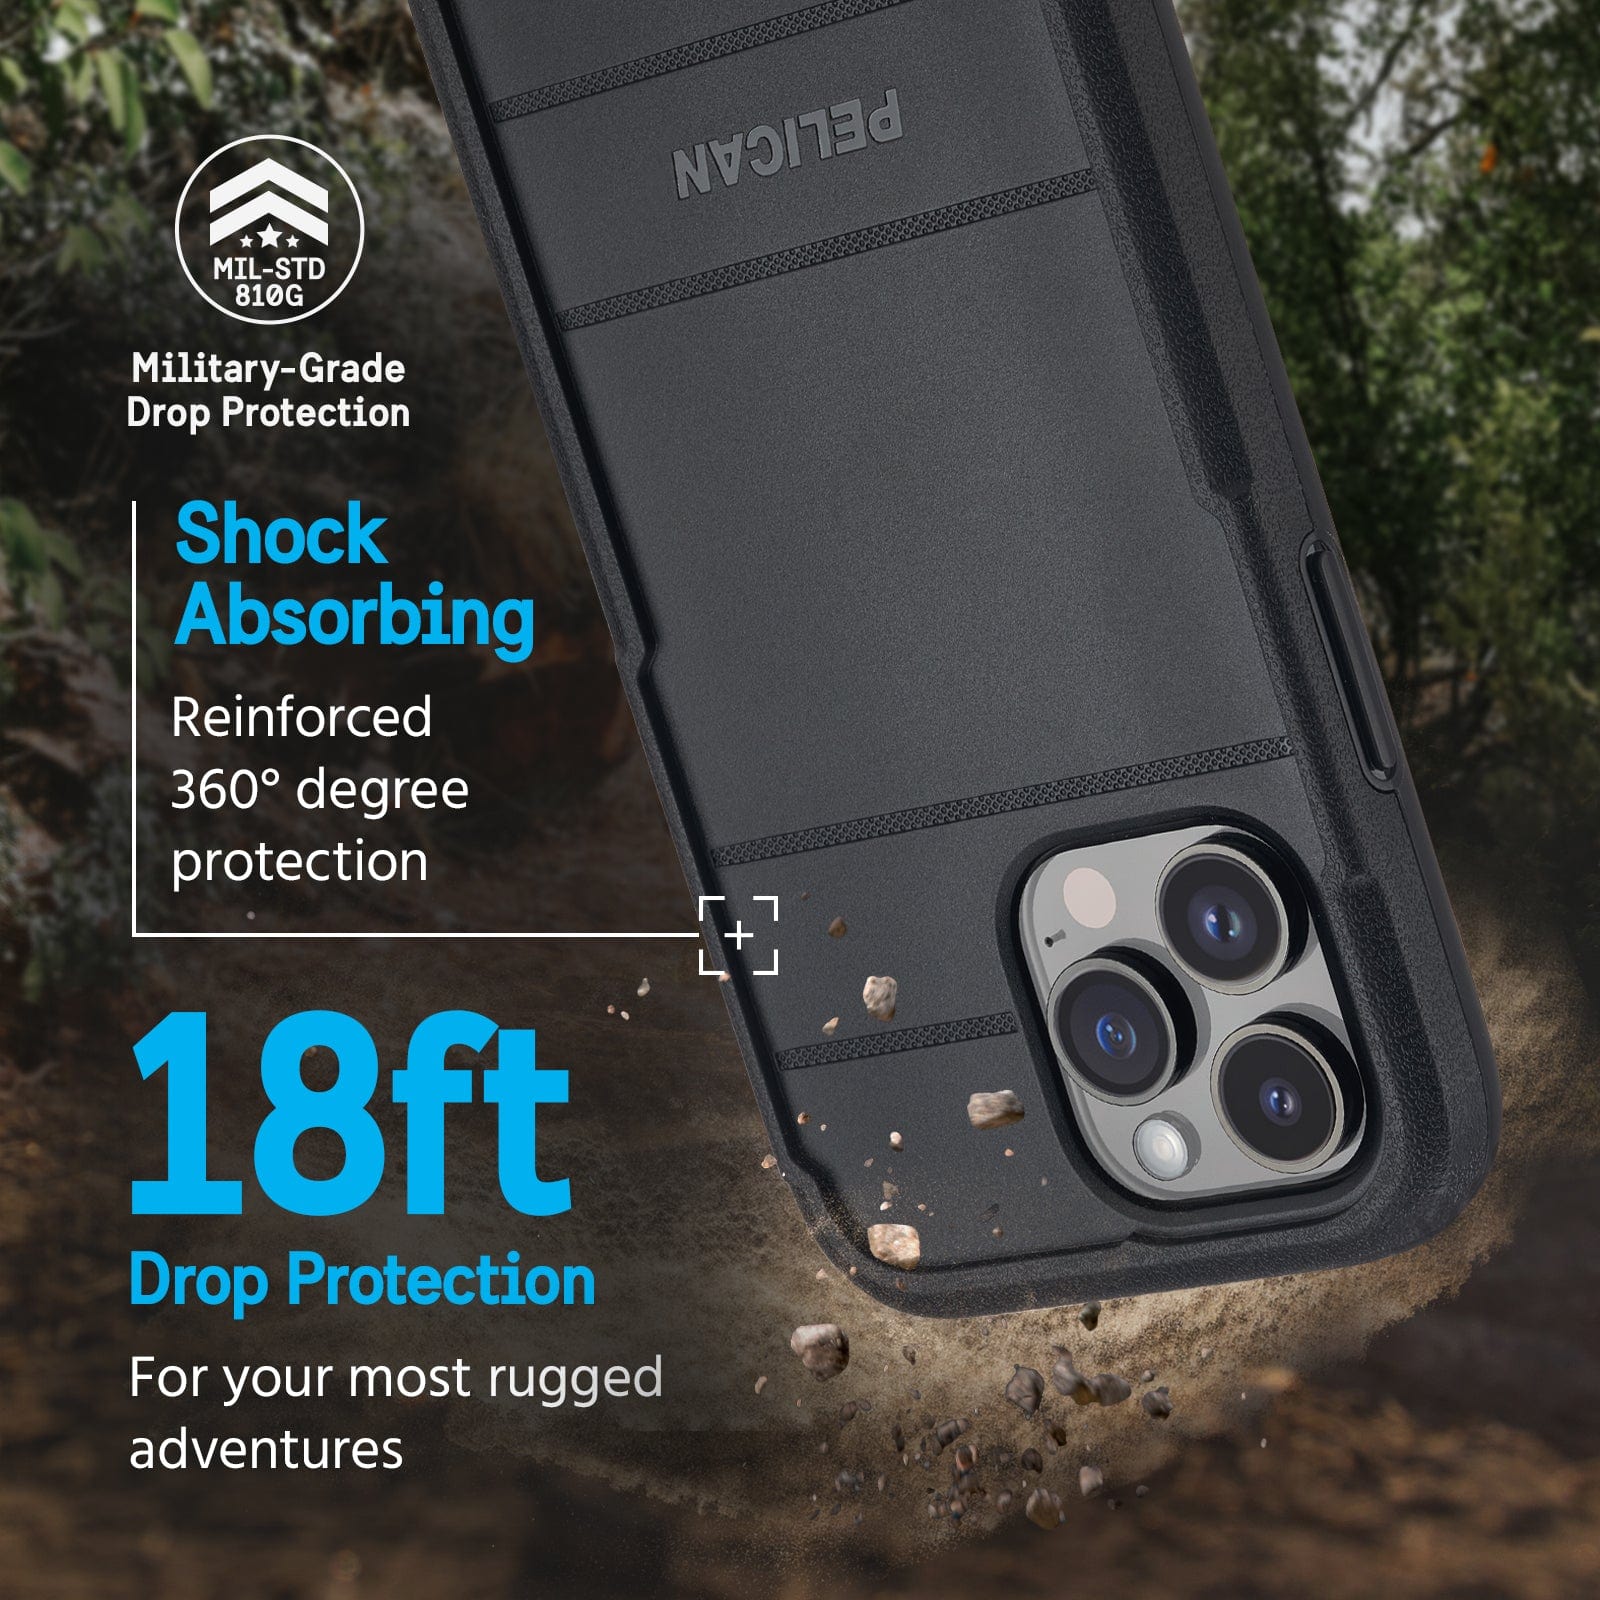 SHOCK ABSORBING REINFORCED 360 DEGREE PROTECTION. 18FT DROP PROTECTION. FOR YOUR MOST RUGGED ADVENTURES. 